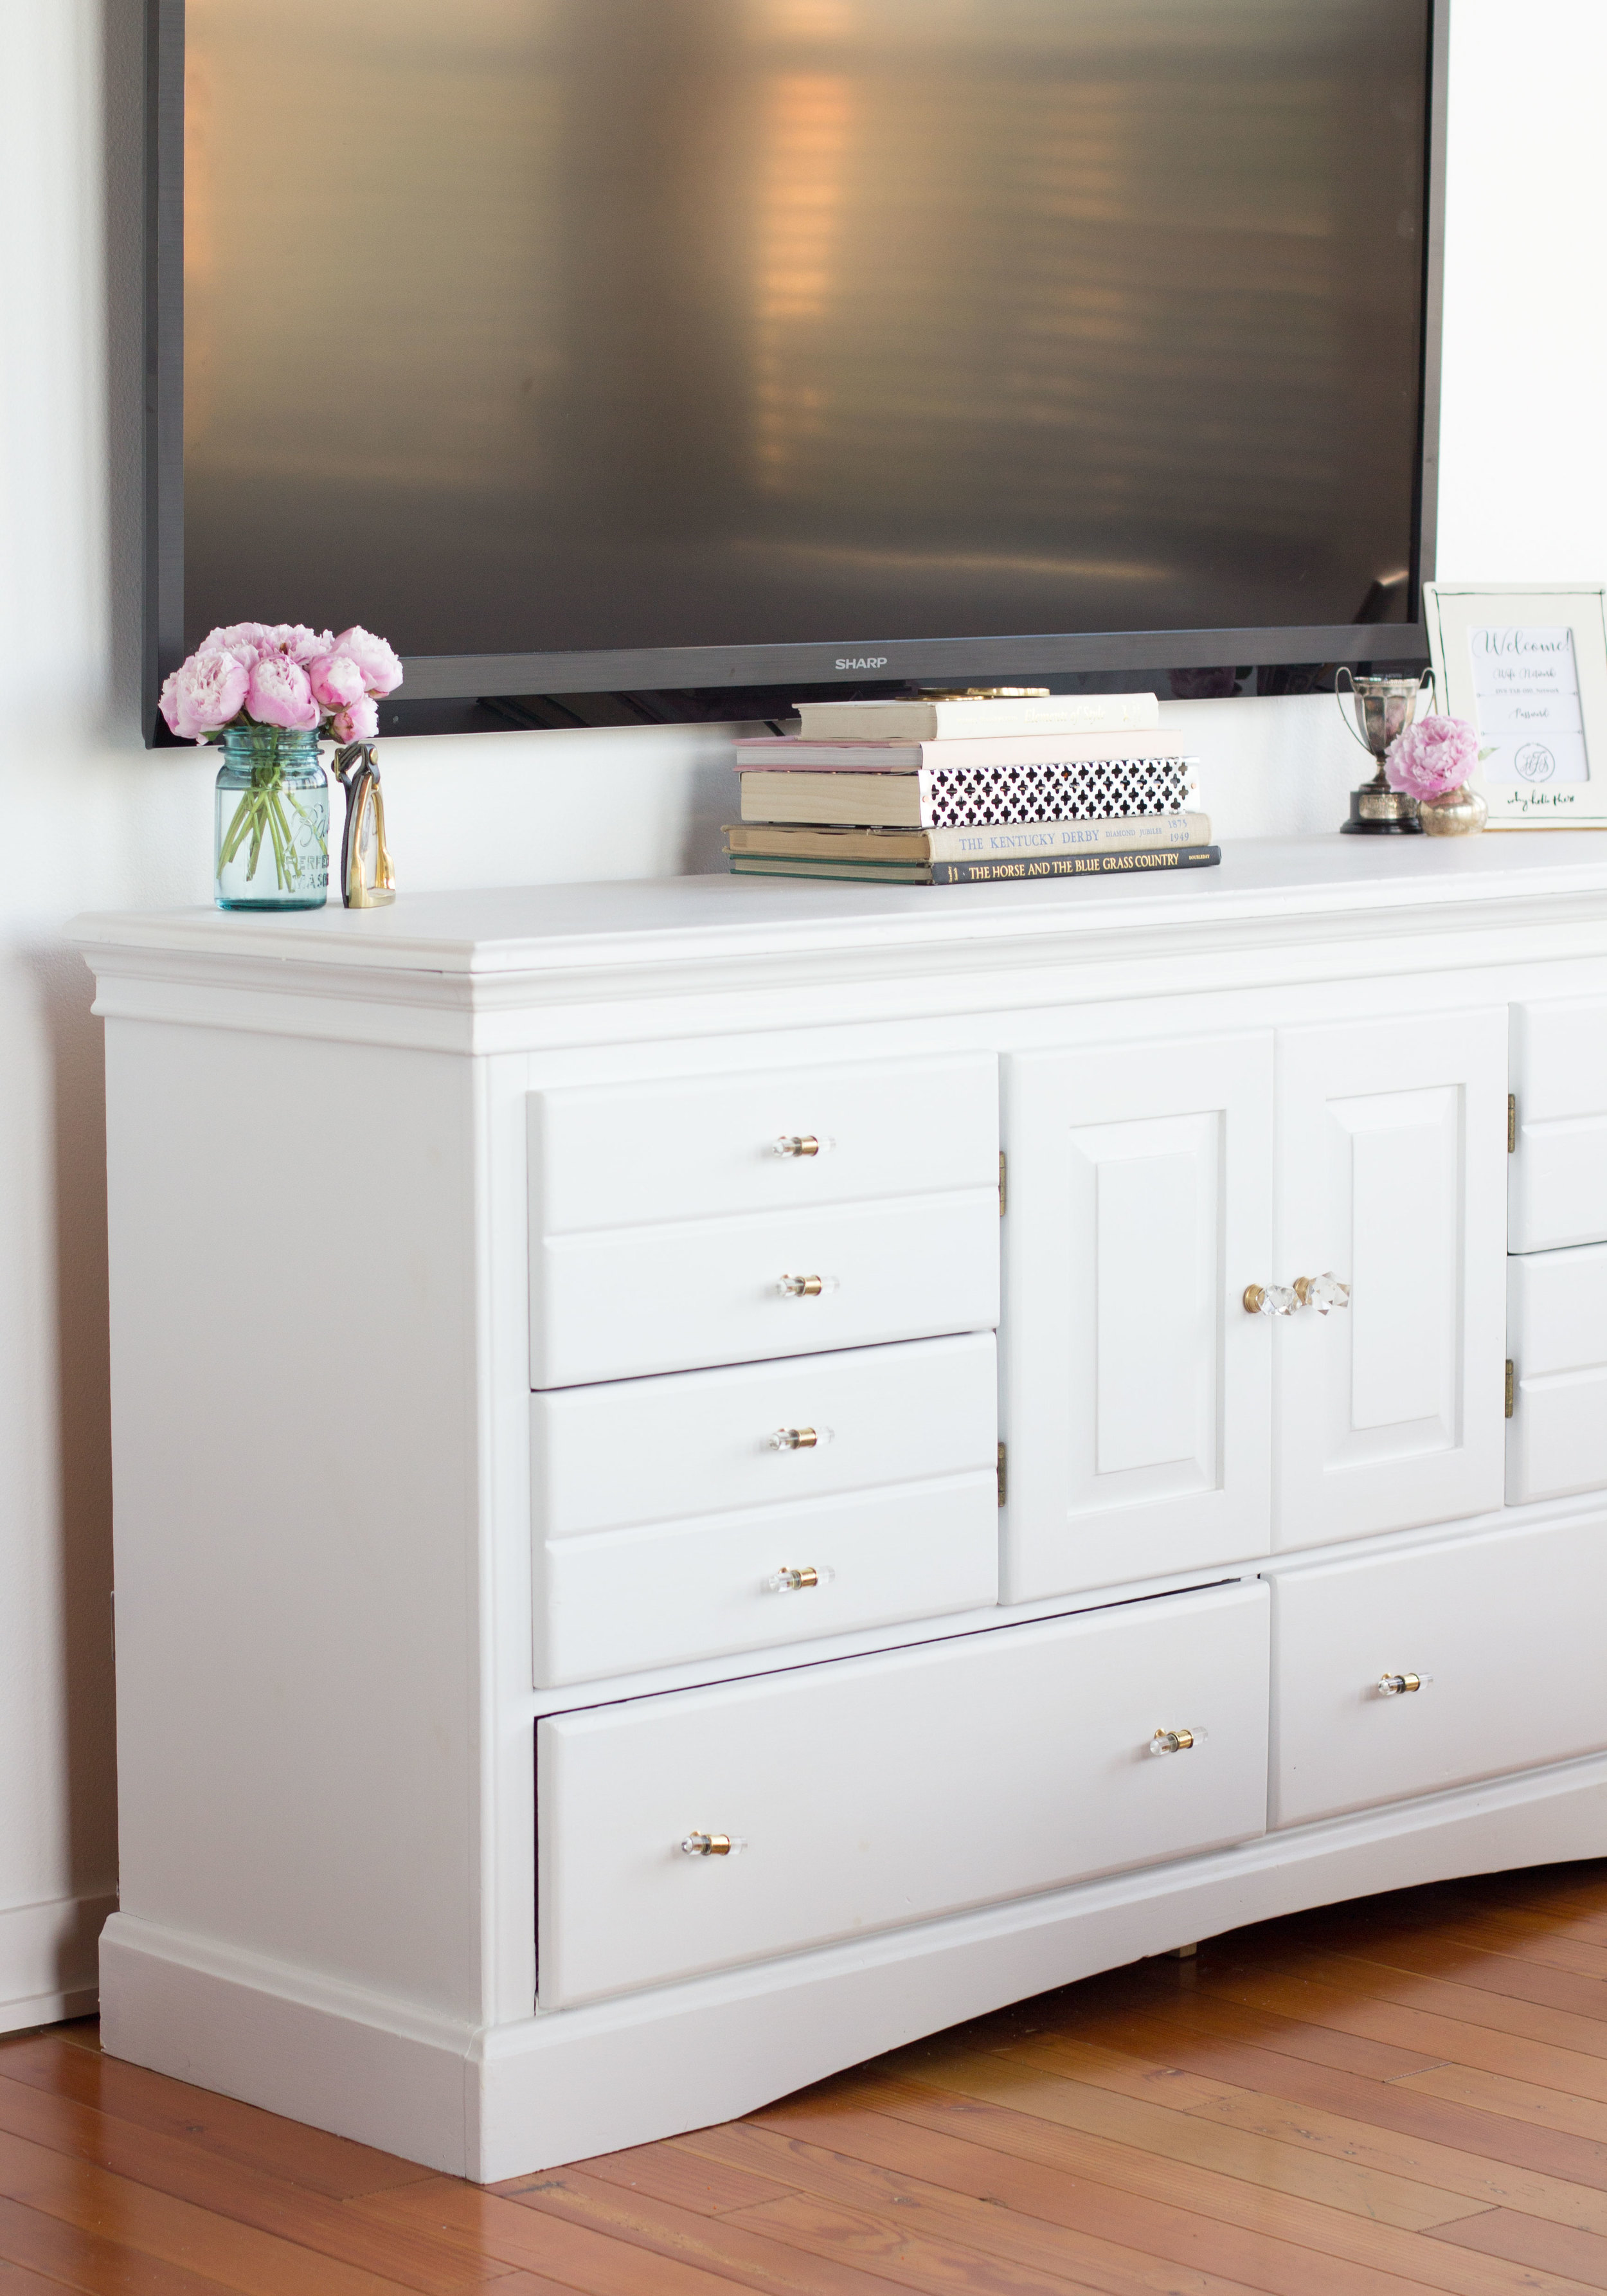 Clear the clutter: how to hide TV wires and cords [guest post from Young  House Love]